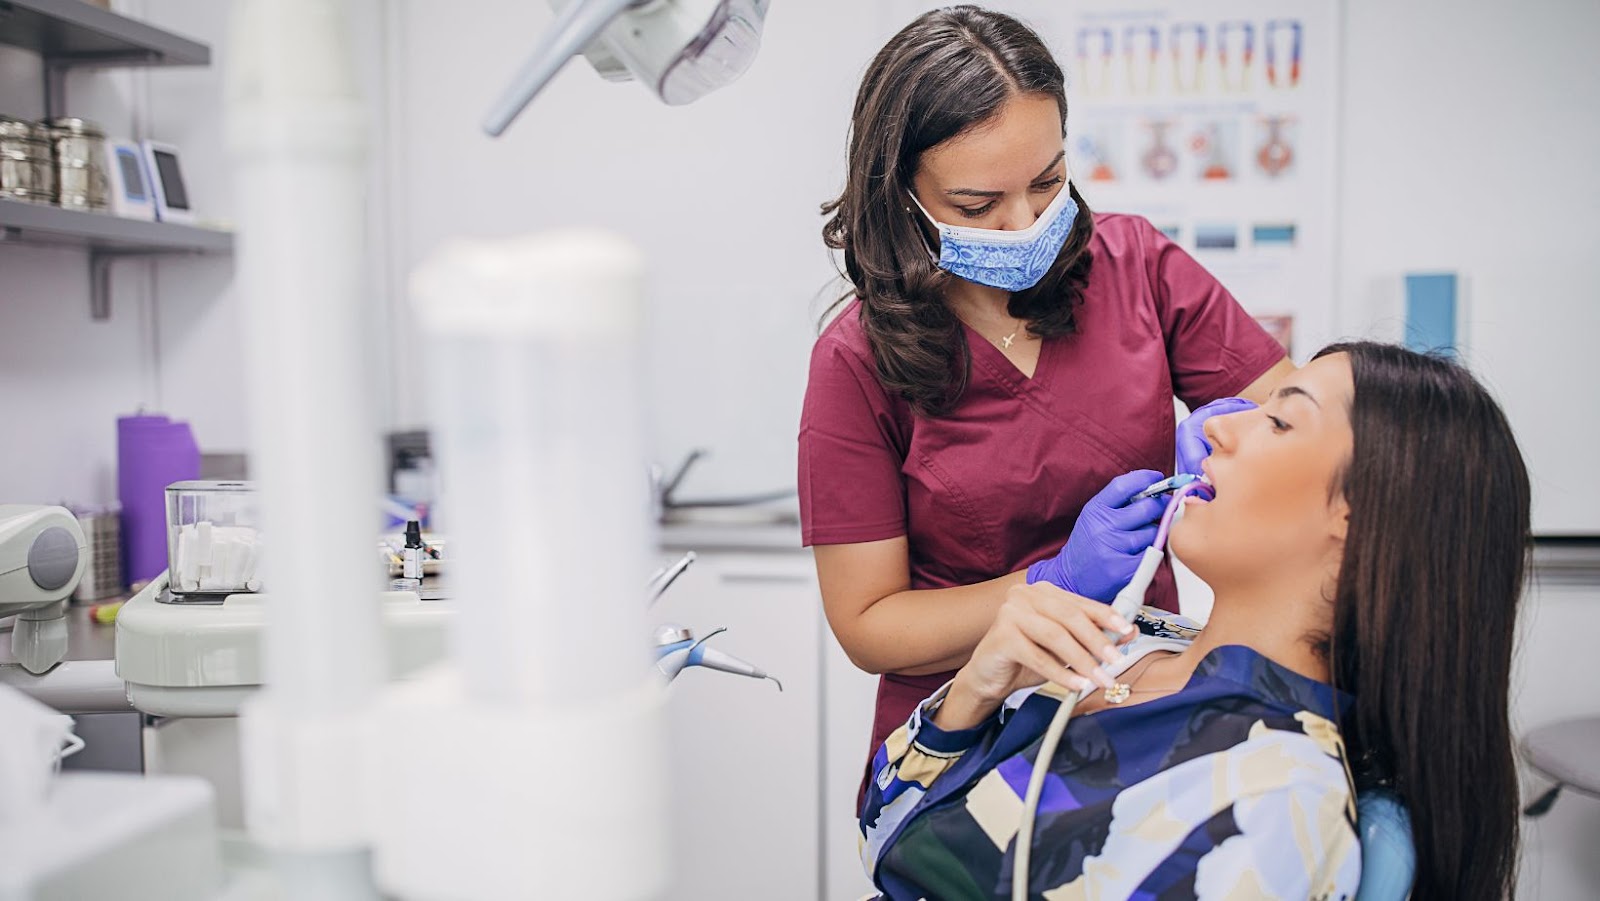 Why is Mexico a Good Destination for Dental Tourism?